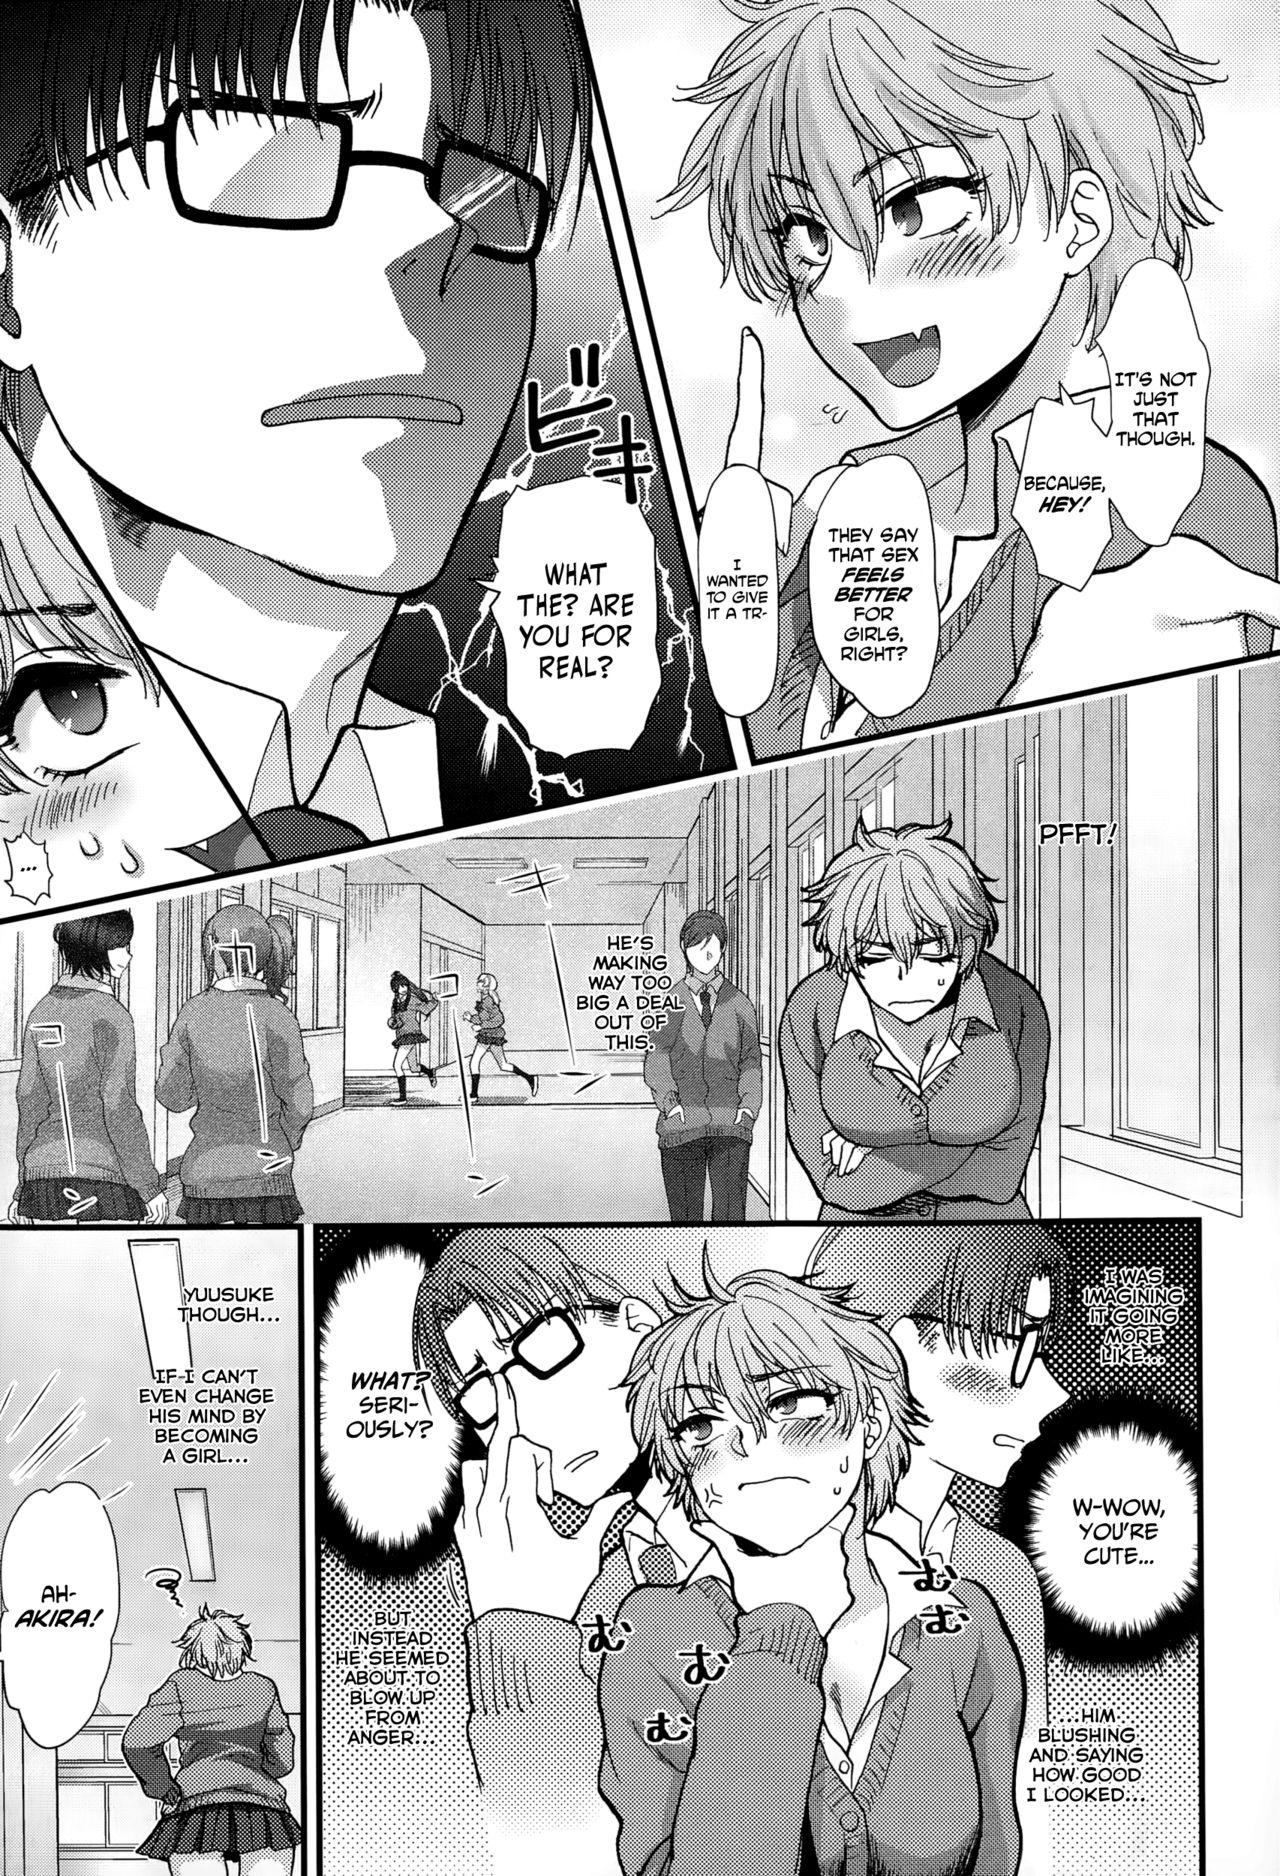 Hotel Shinyuu Affection - Best Friend Affection College - Page 3